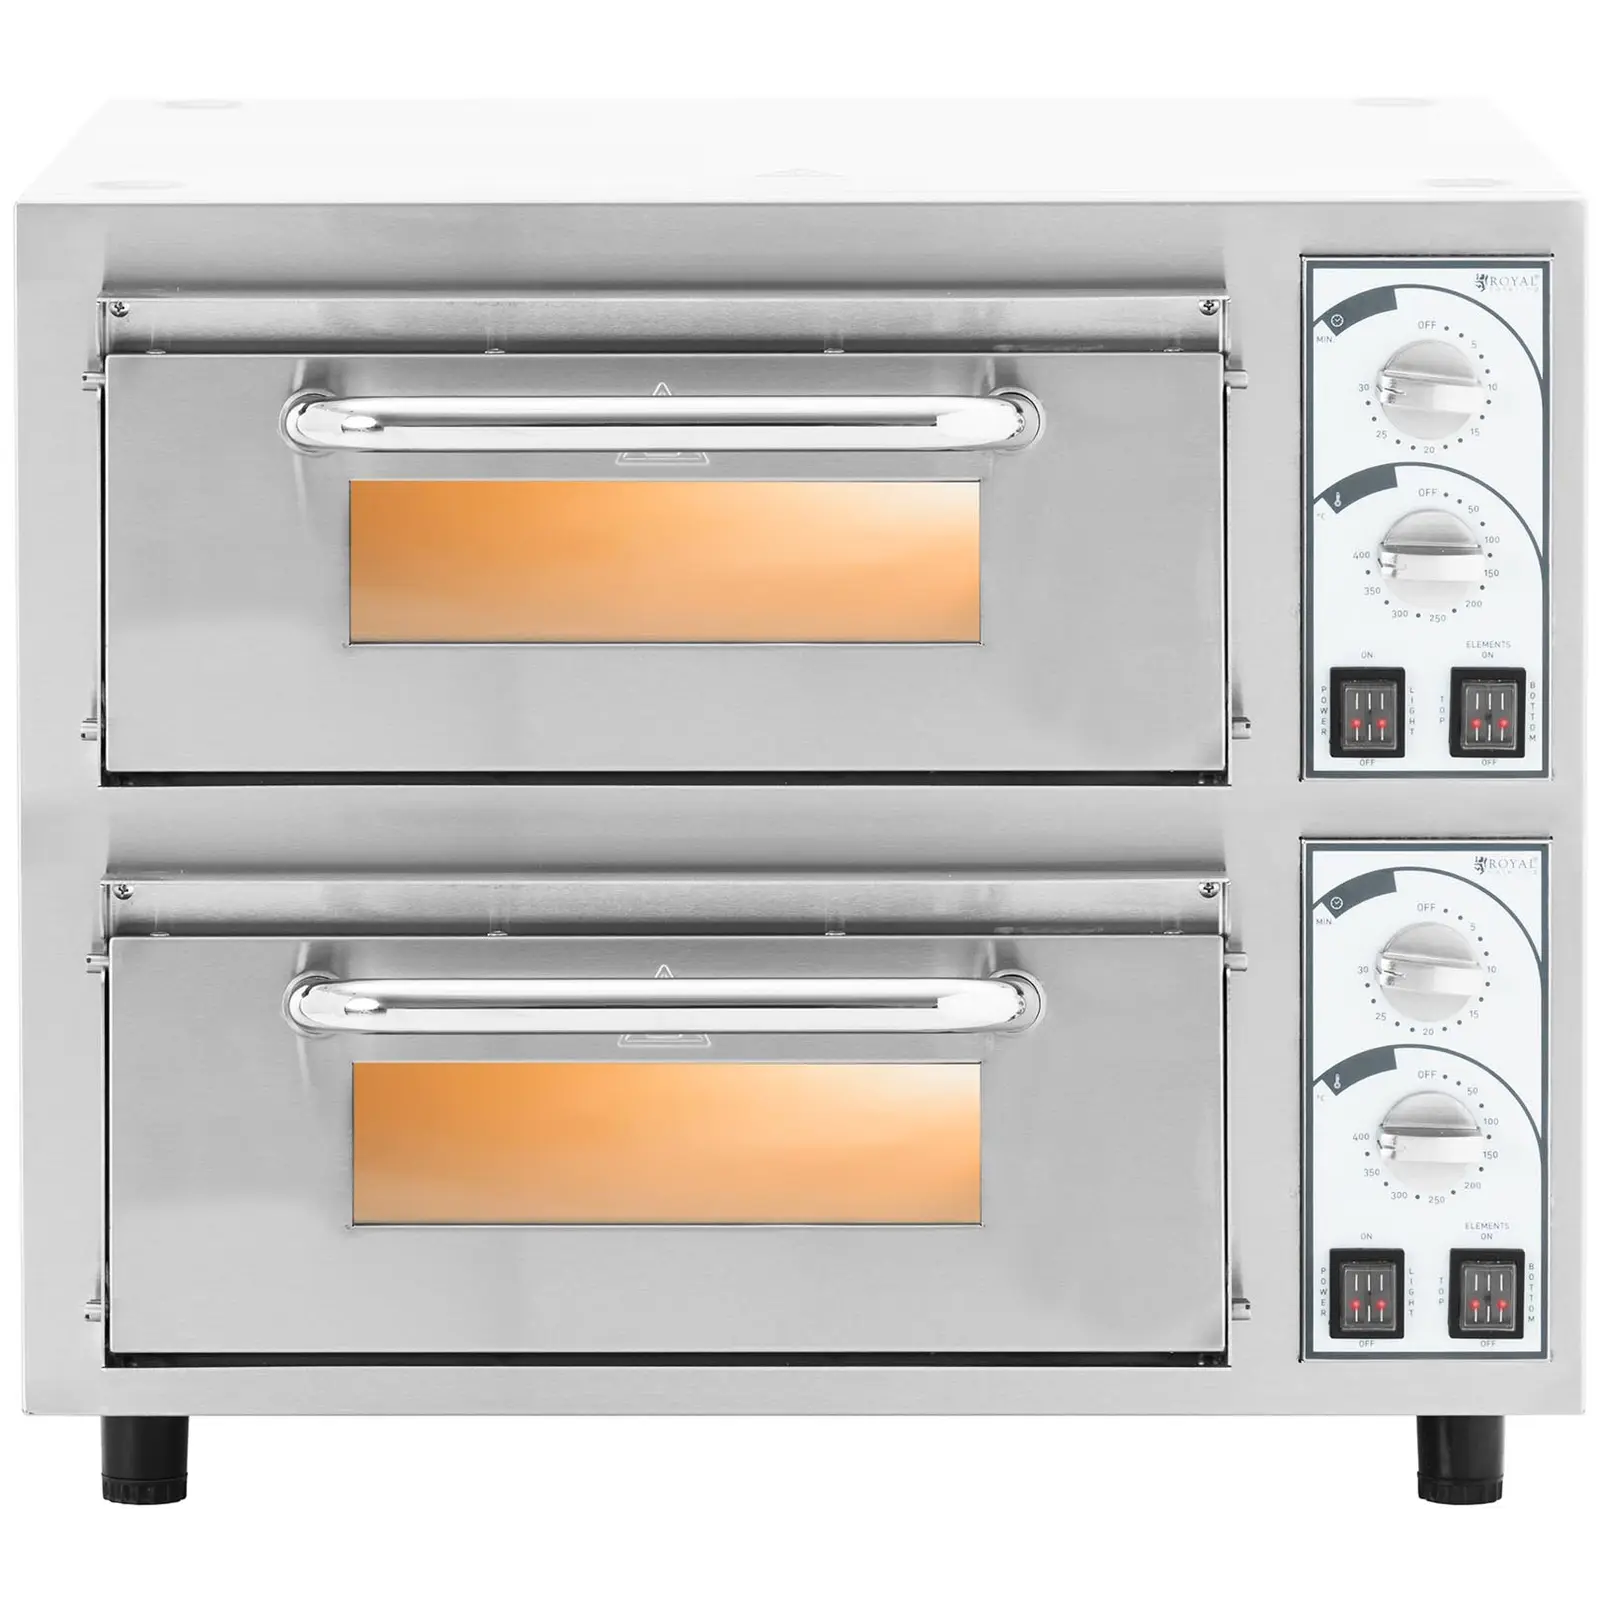 Pizzaovn - 2 kammer - 4750 W - Ø 40 cm - ildfast stein - Royal Catering